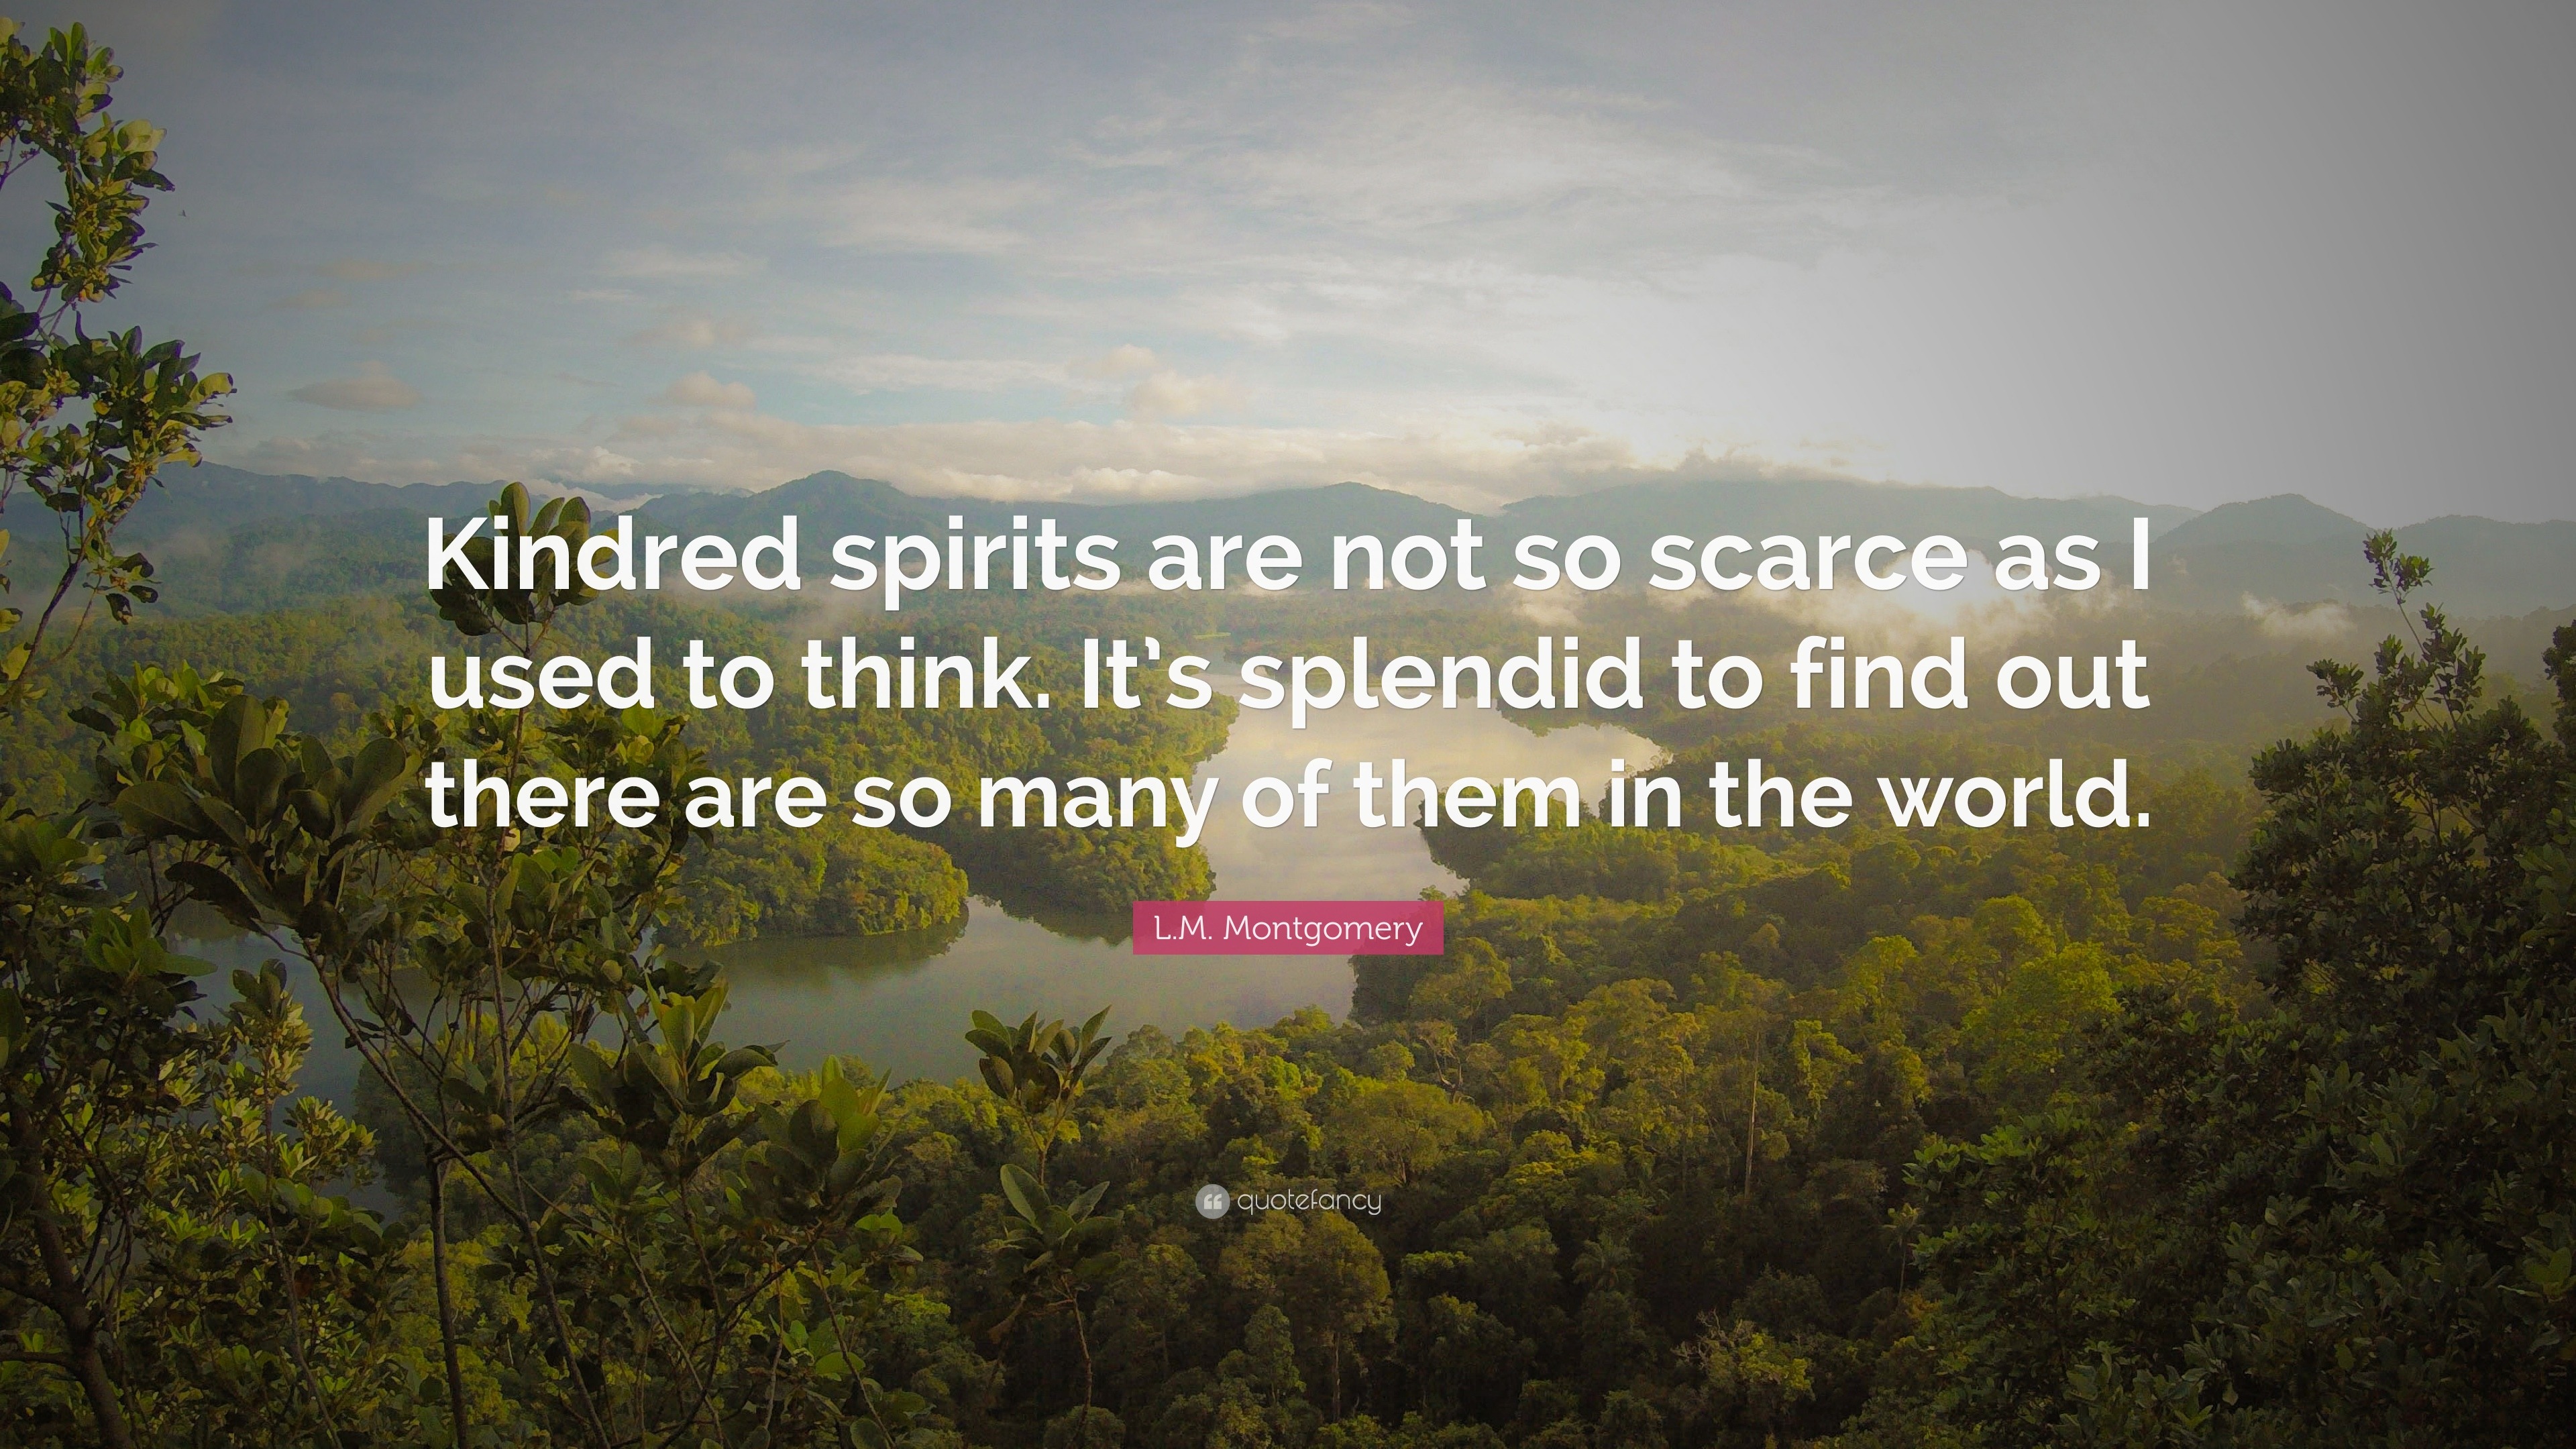 Lm Montgomery Quote “kindred Spirits Are Not So Scarce As I Used To Think Its Splendid To